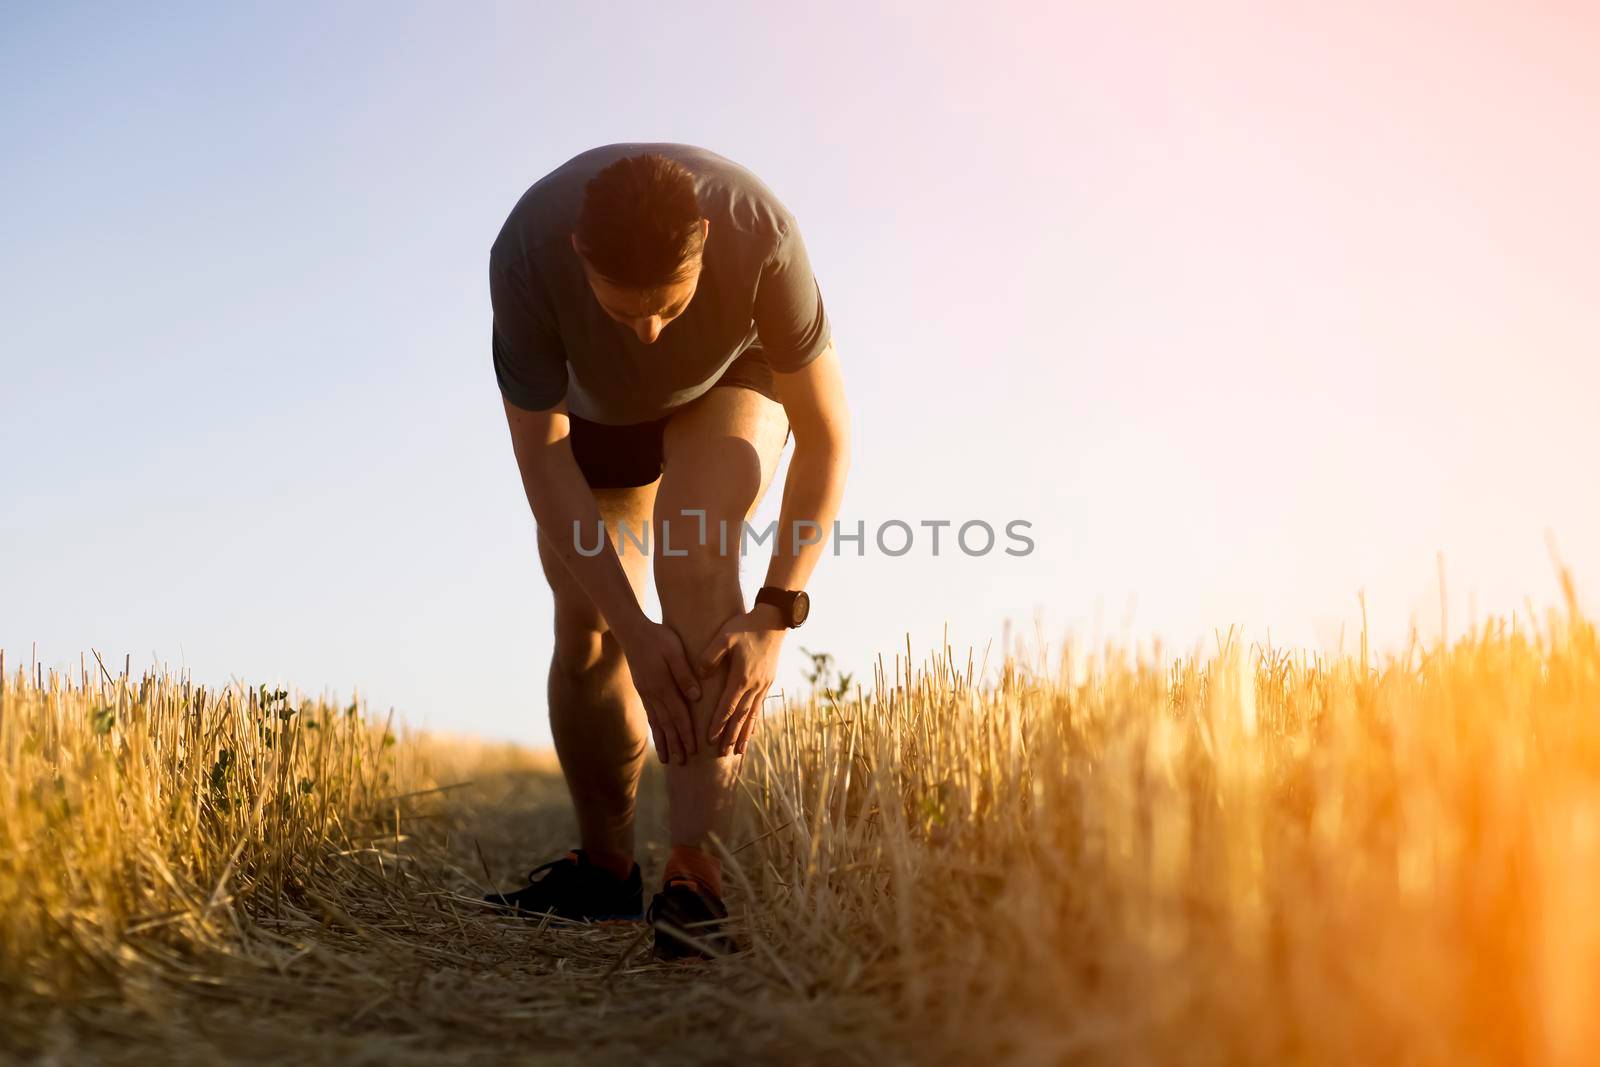 A young man jogging at sunset on the trail across the field, the tired athlete holds on to his sore knee.